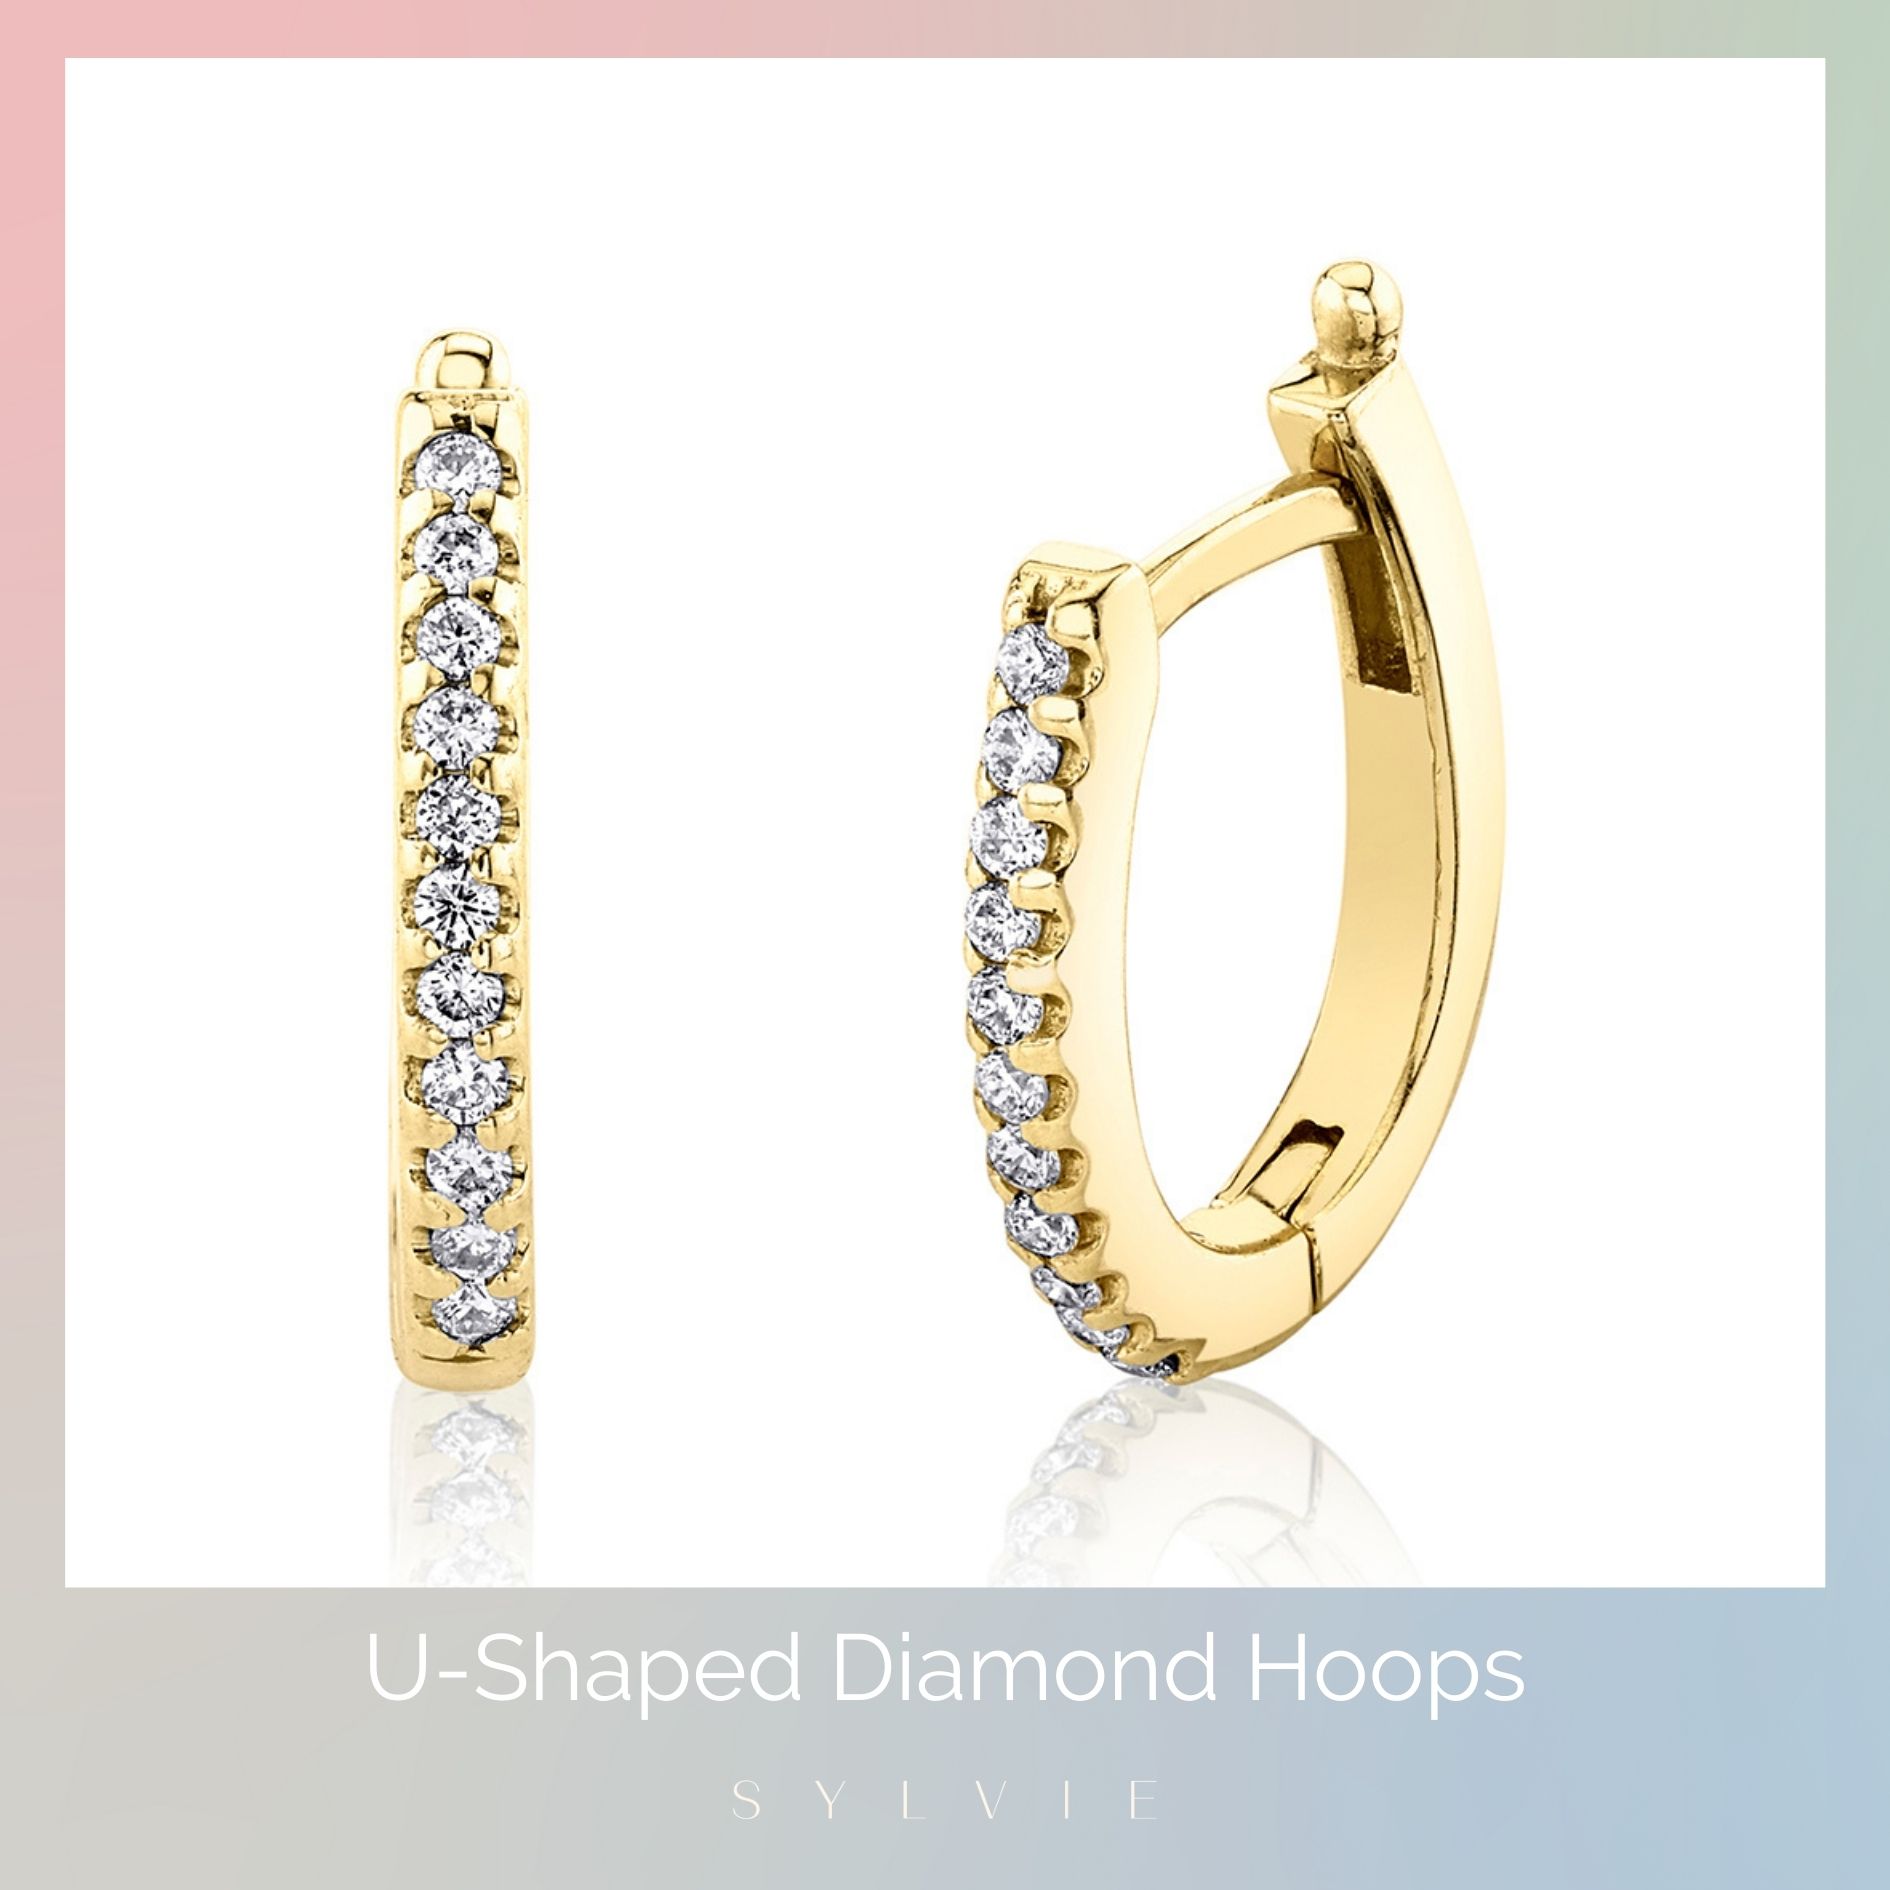 mother's day gift guide u-shaped diamond hoops